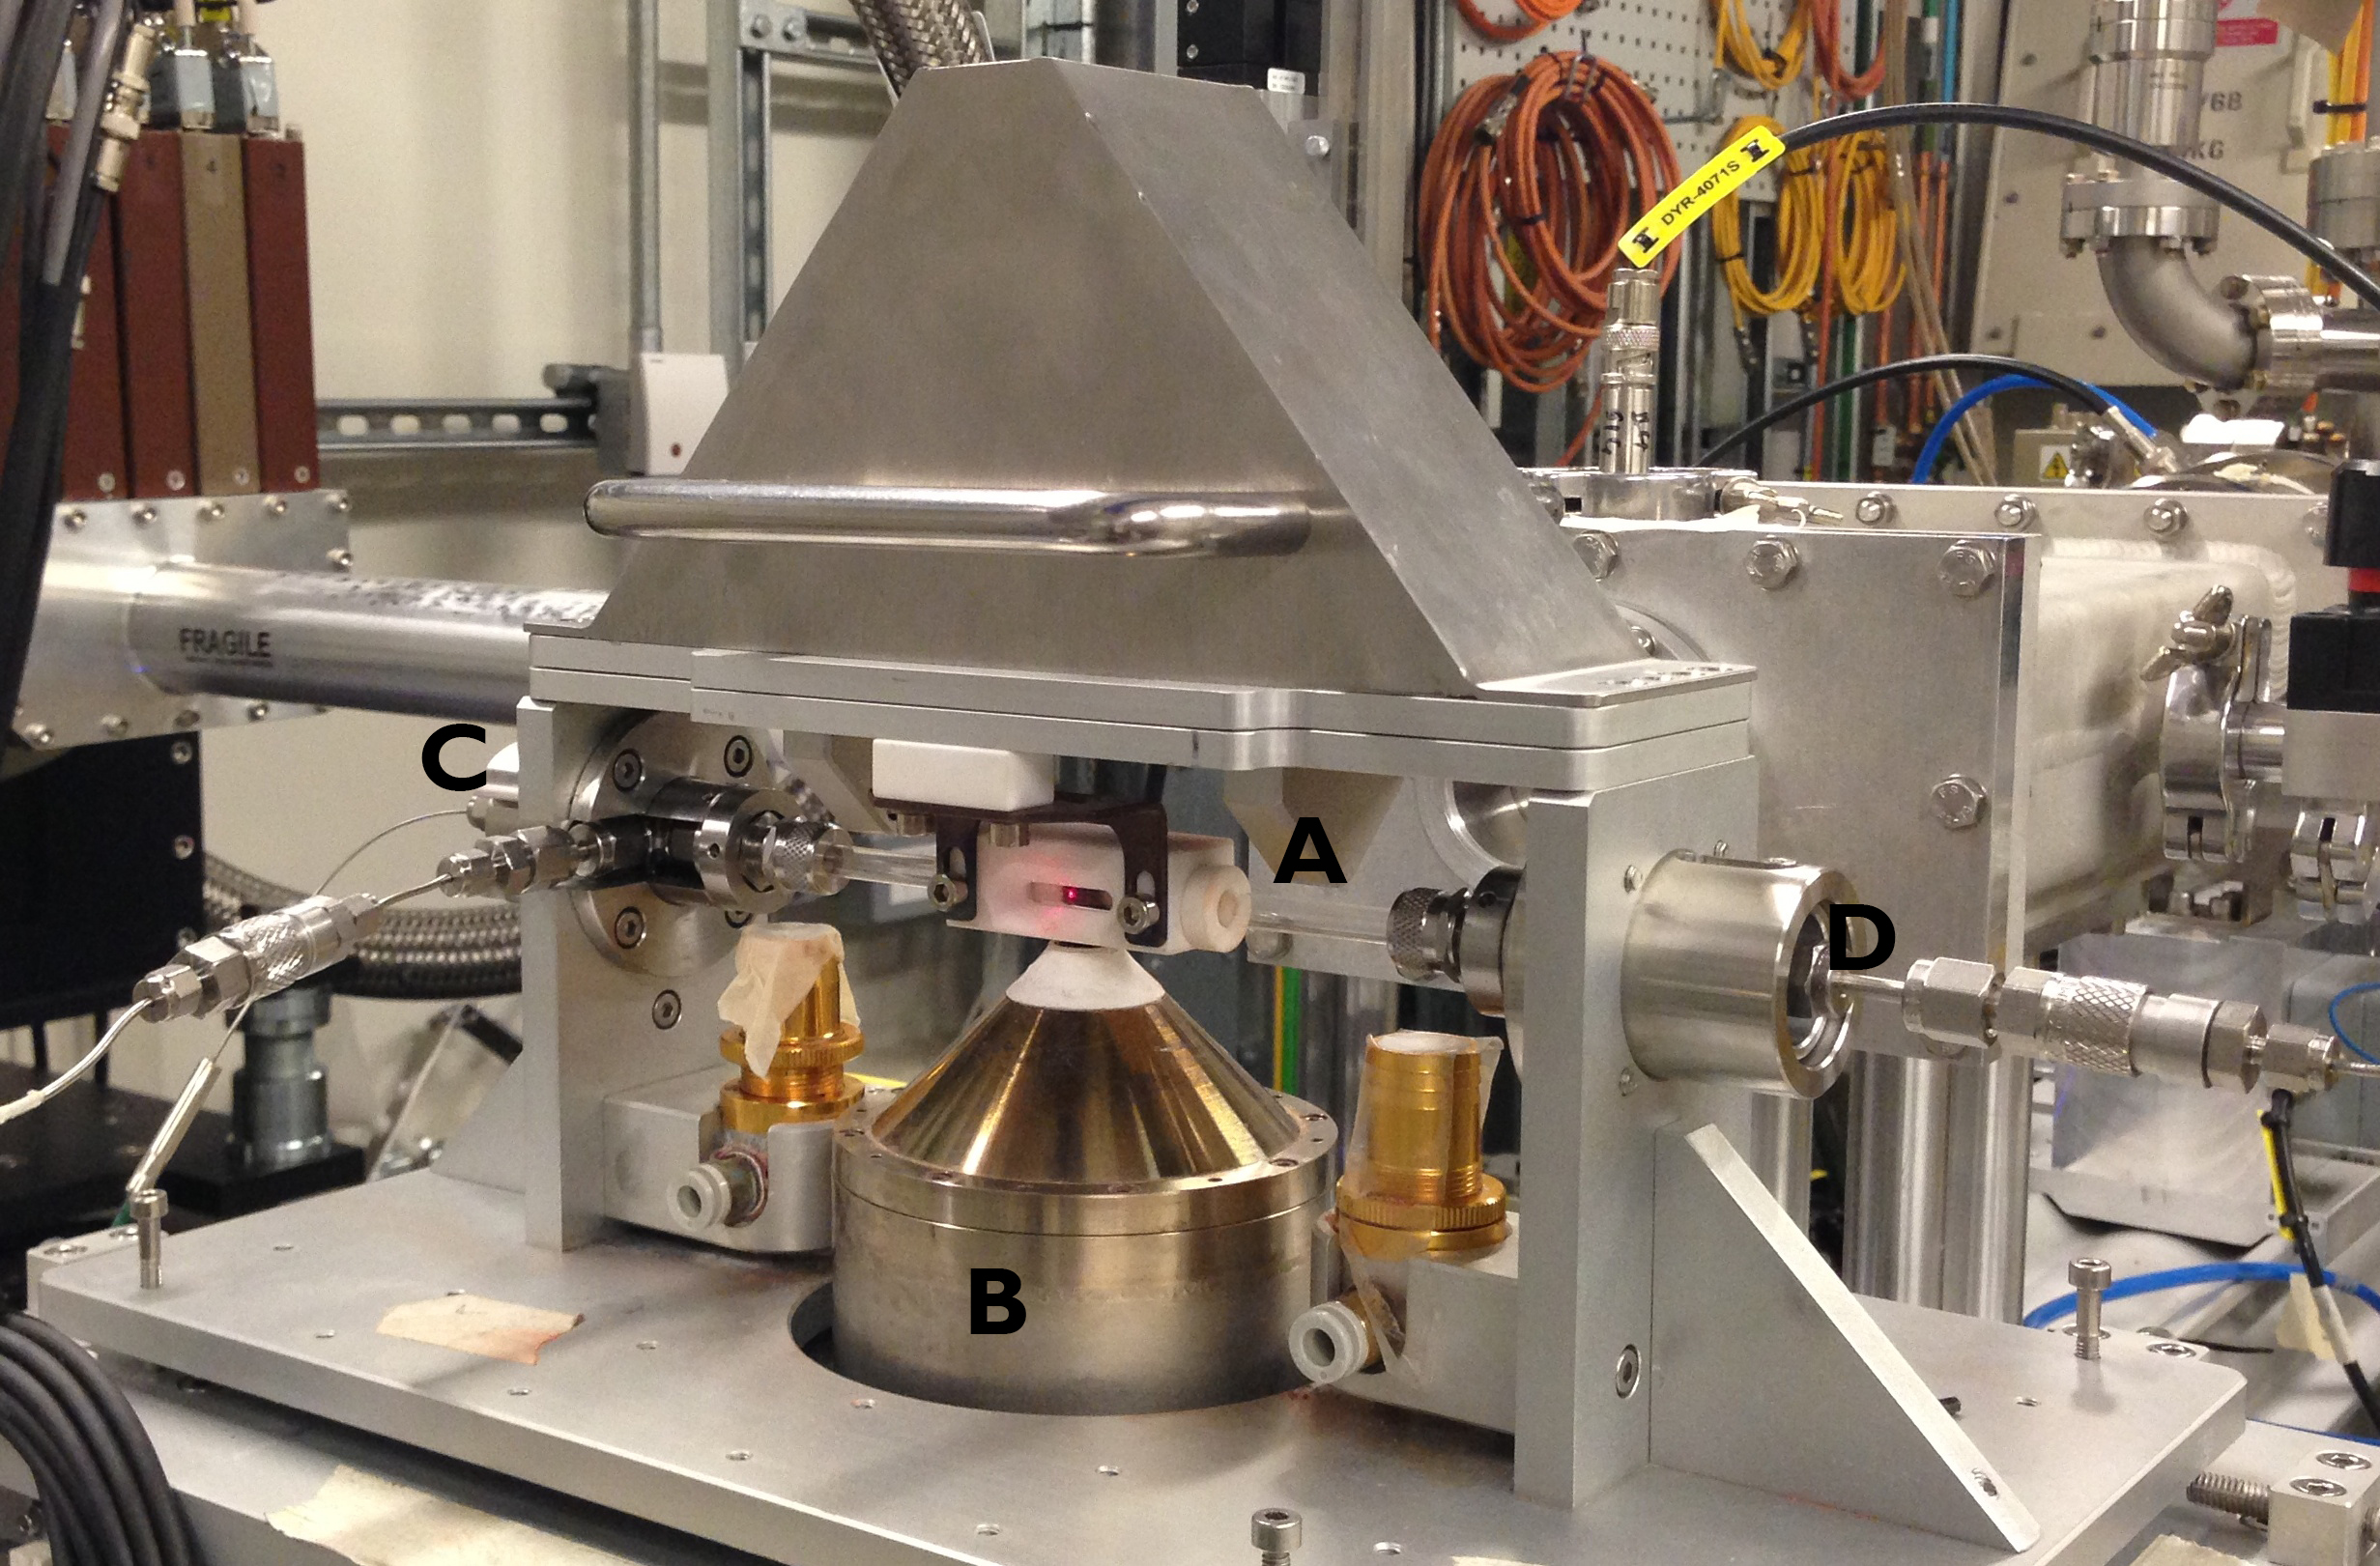 Figure 1. The fully assembled capillary-based sample cell that includes a) capillary cell, b) hot air blower, c) thermocouple inlet and d) the gas flow inlet; allowing both XAS and XRD studies and the determination of the catalytic performance of the catalysts.